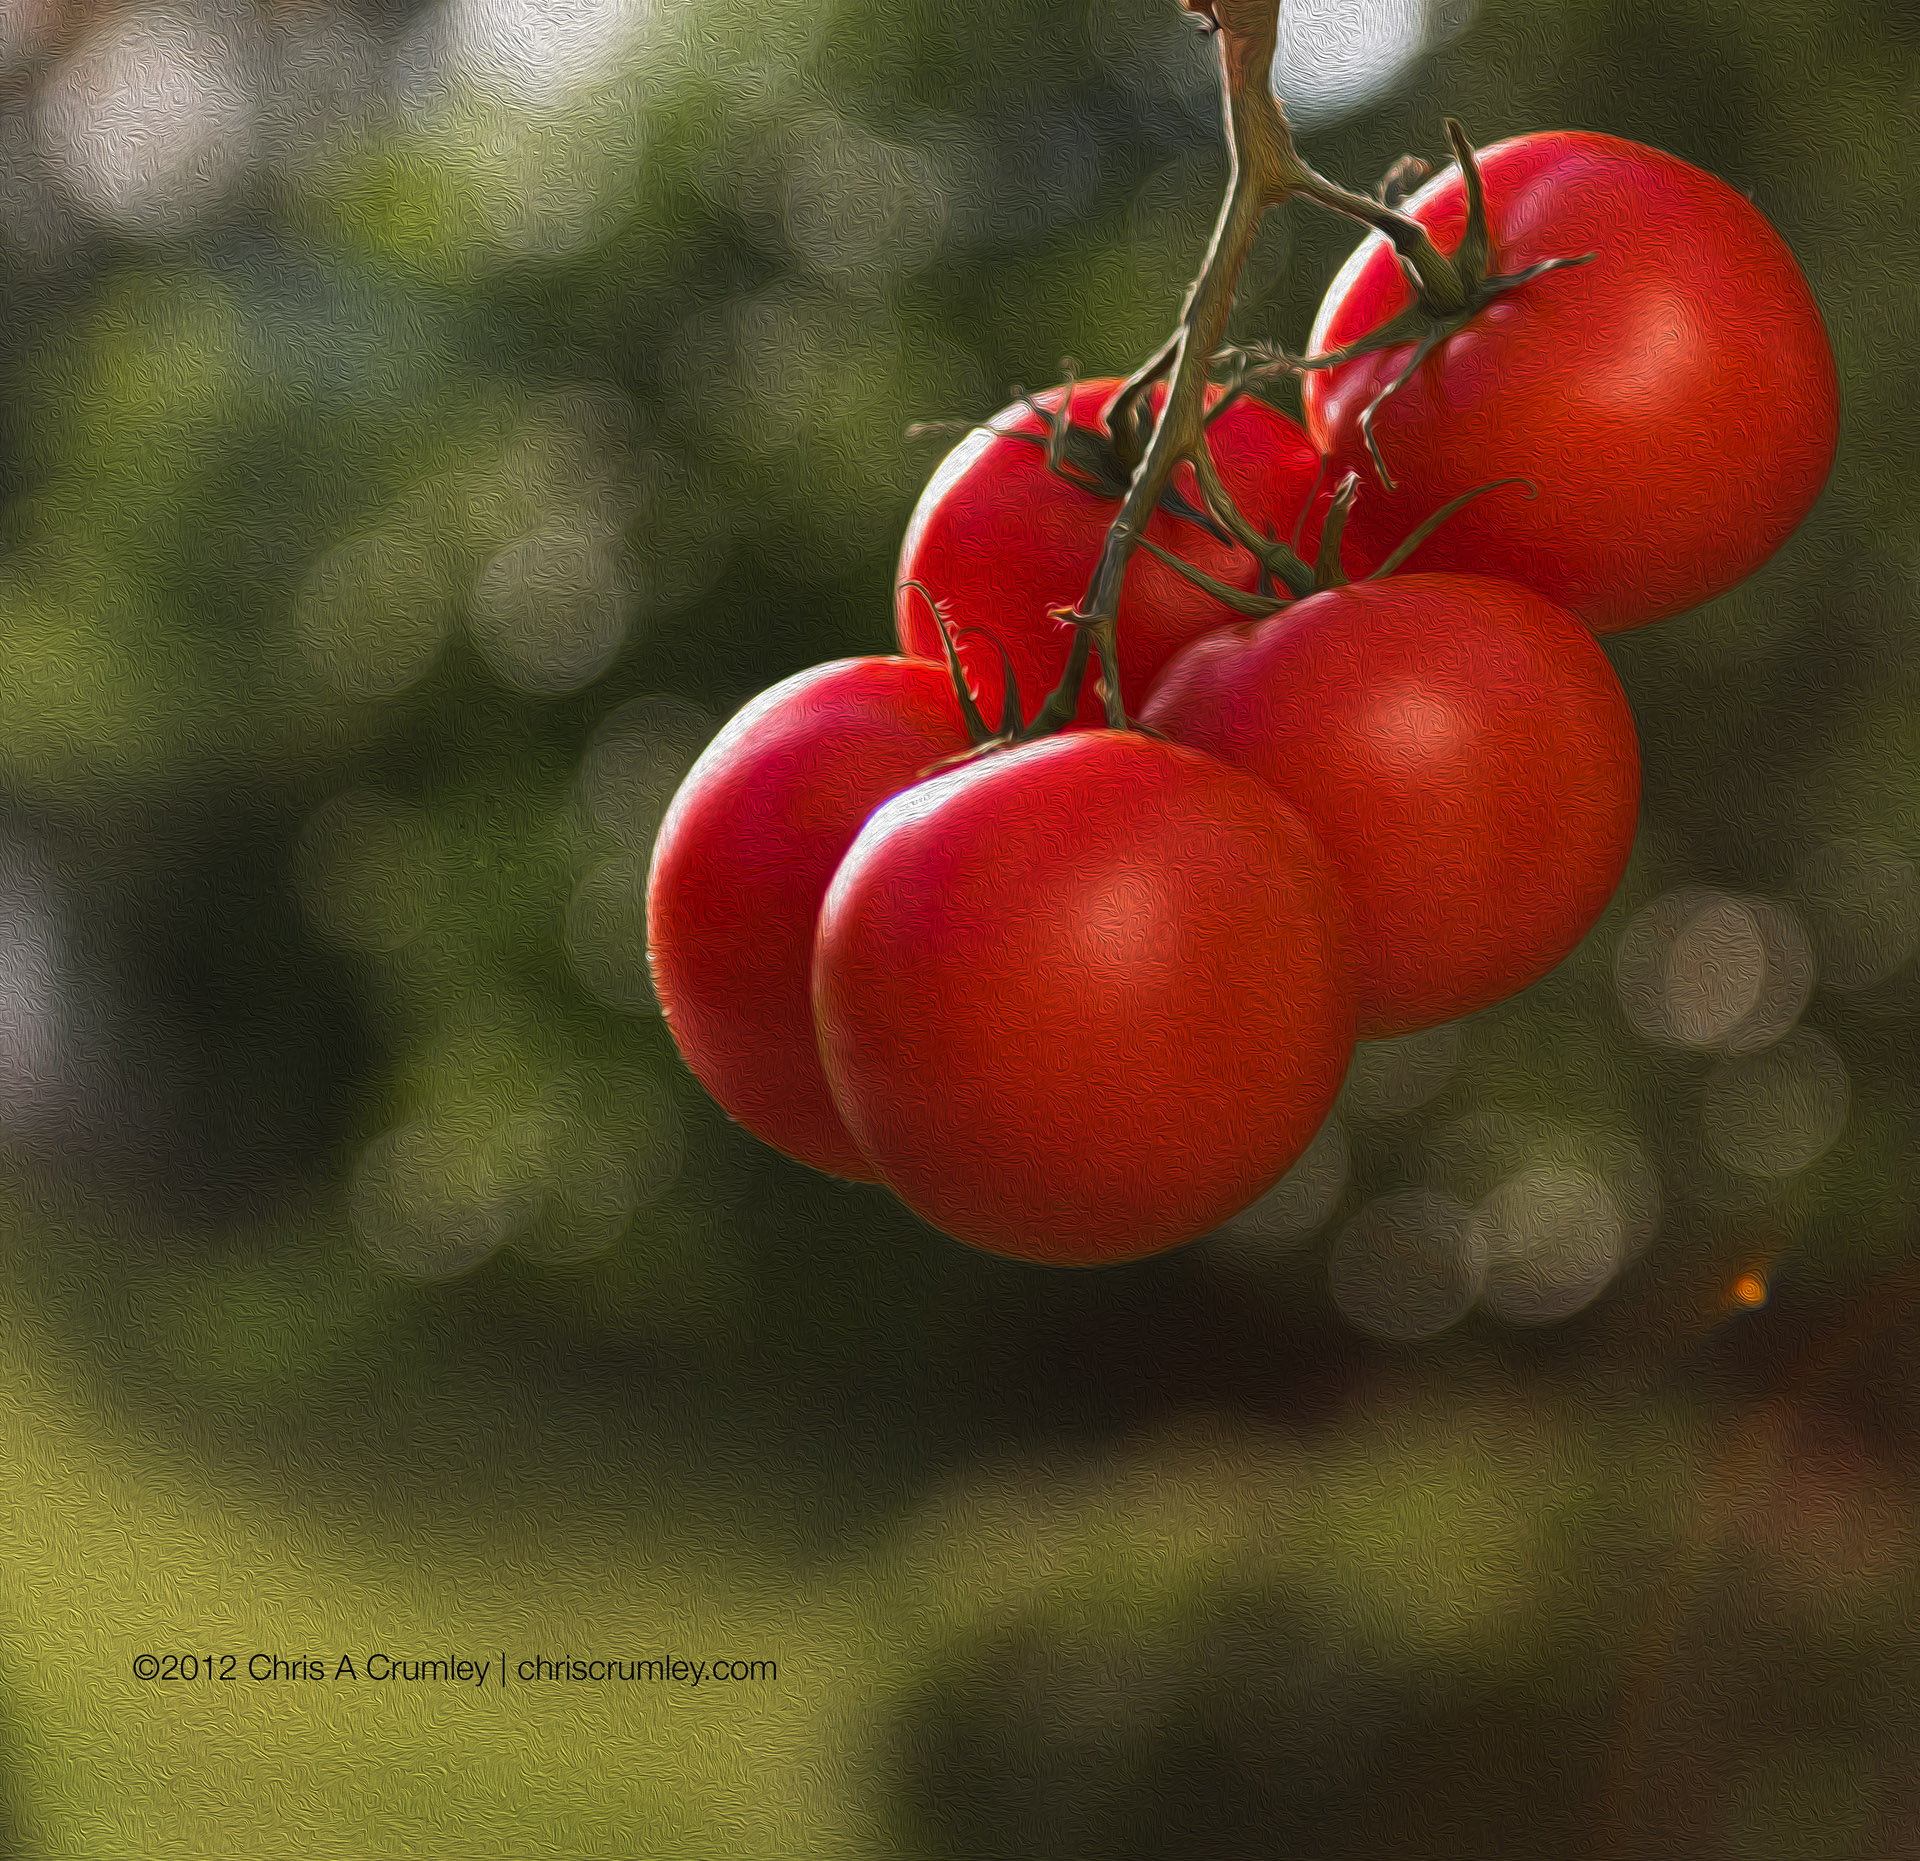 Red Period - Tomatoes